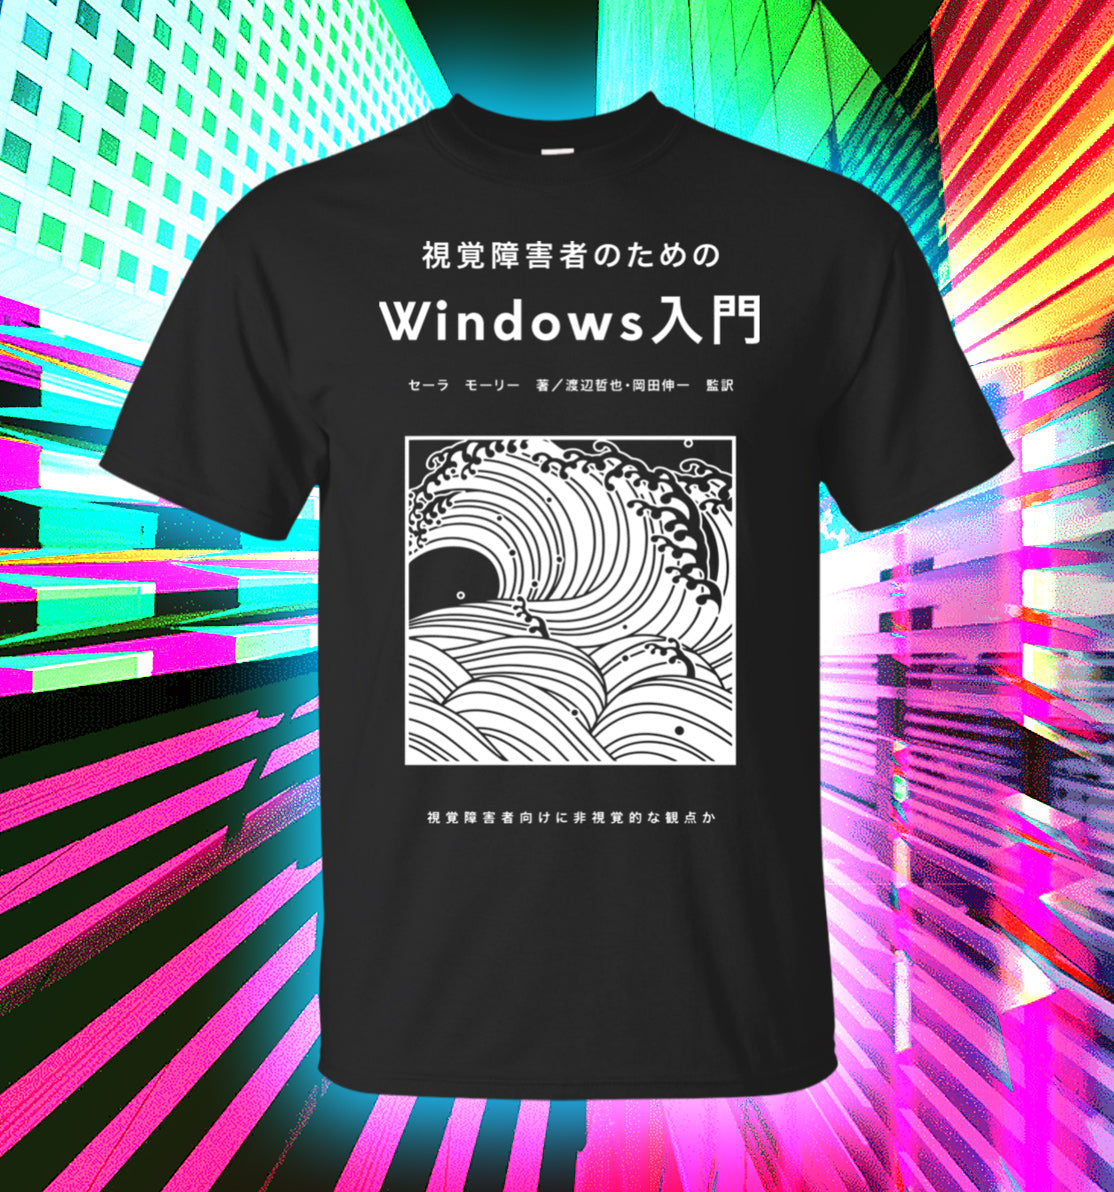 Windows 98 Collection T-Shirt by palm-treat.myshopify.com for sale online now - the latest Vaporwave &amp; Soft Grunge Clothing